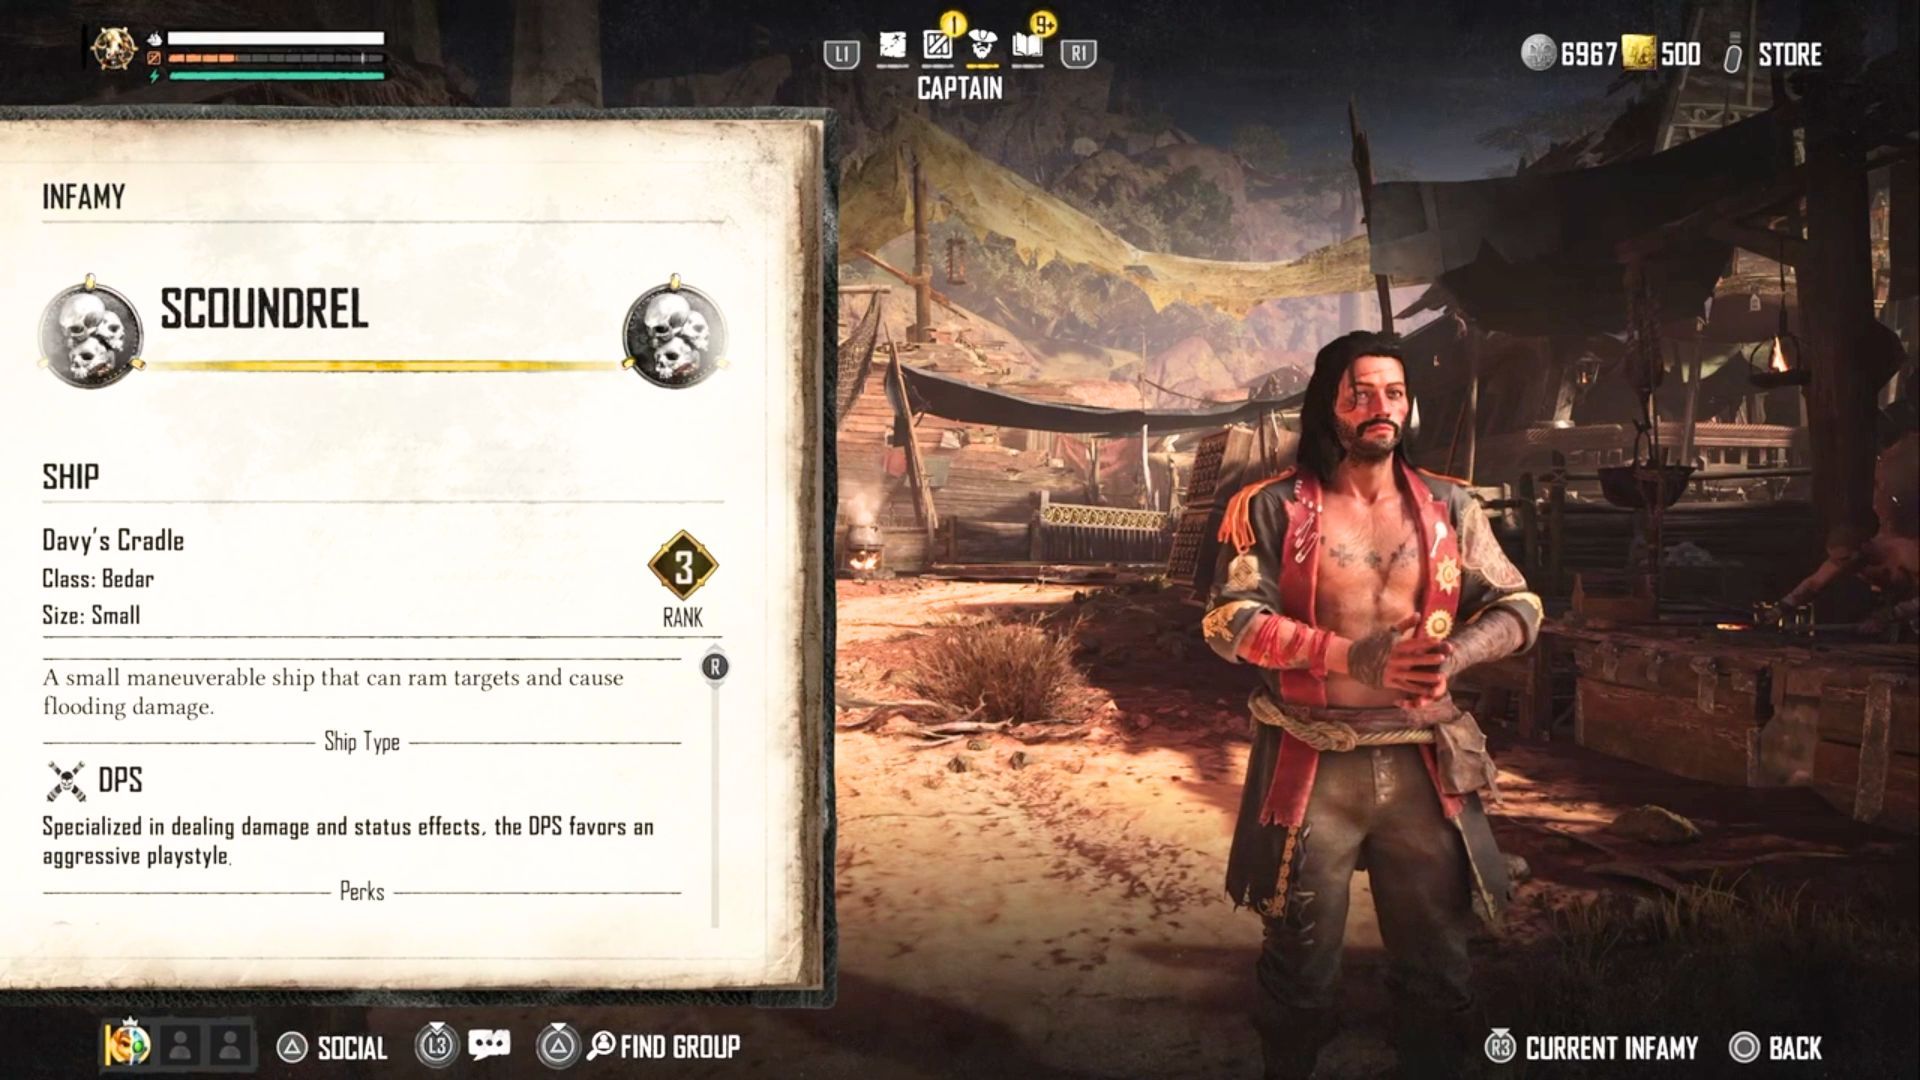 The Captain menu of Skull and Bones showing player information